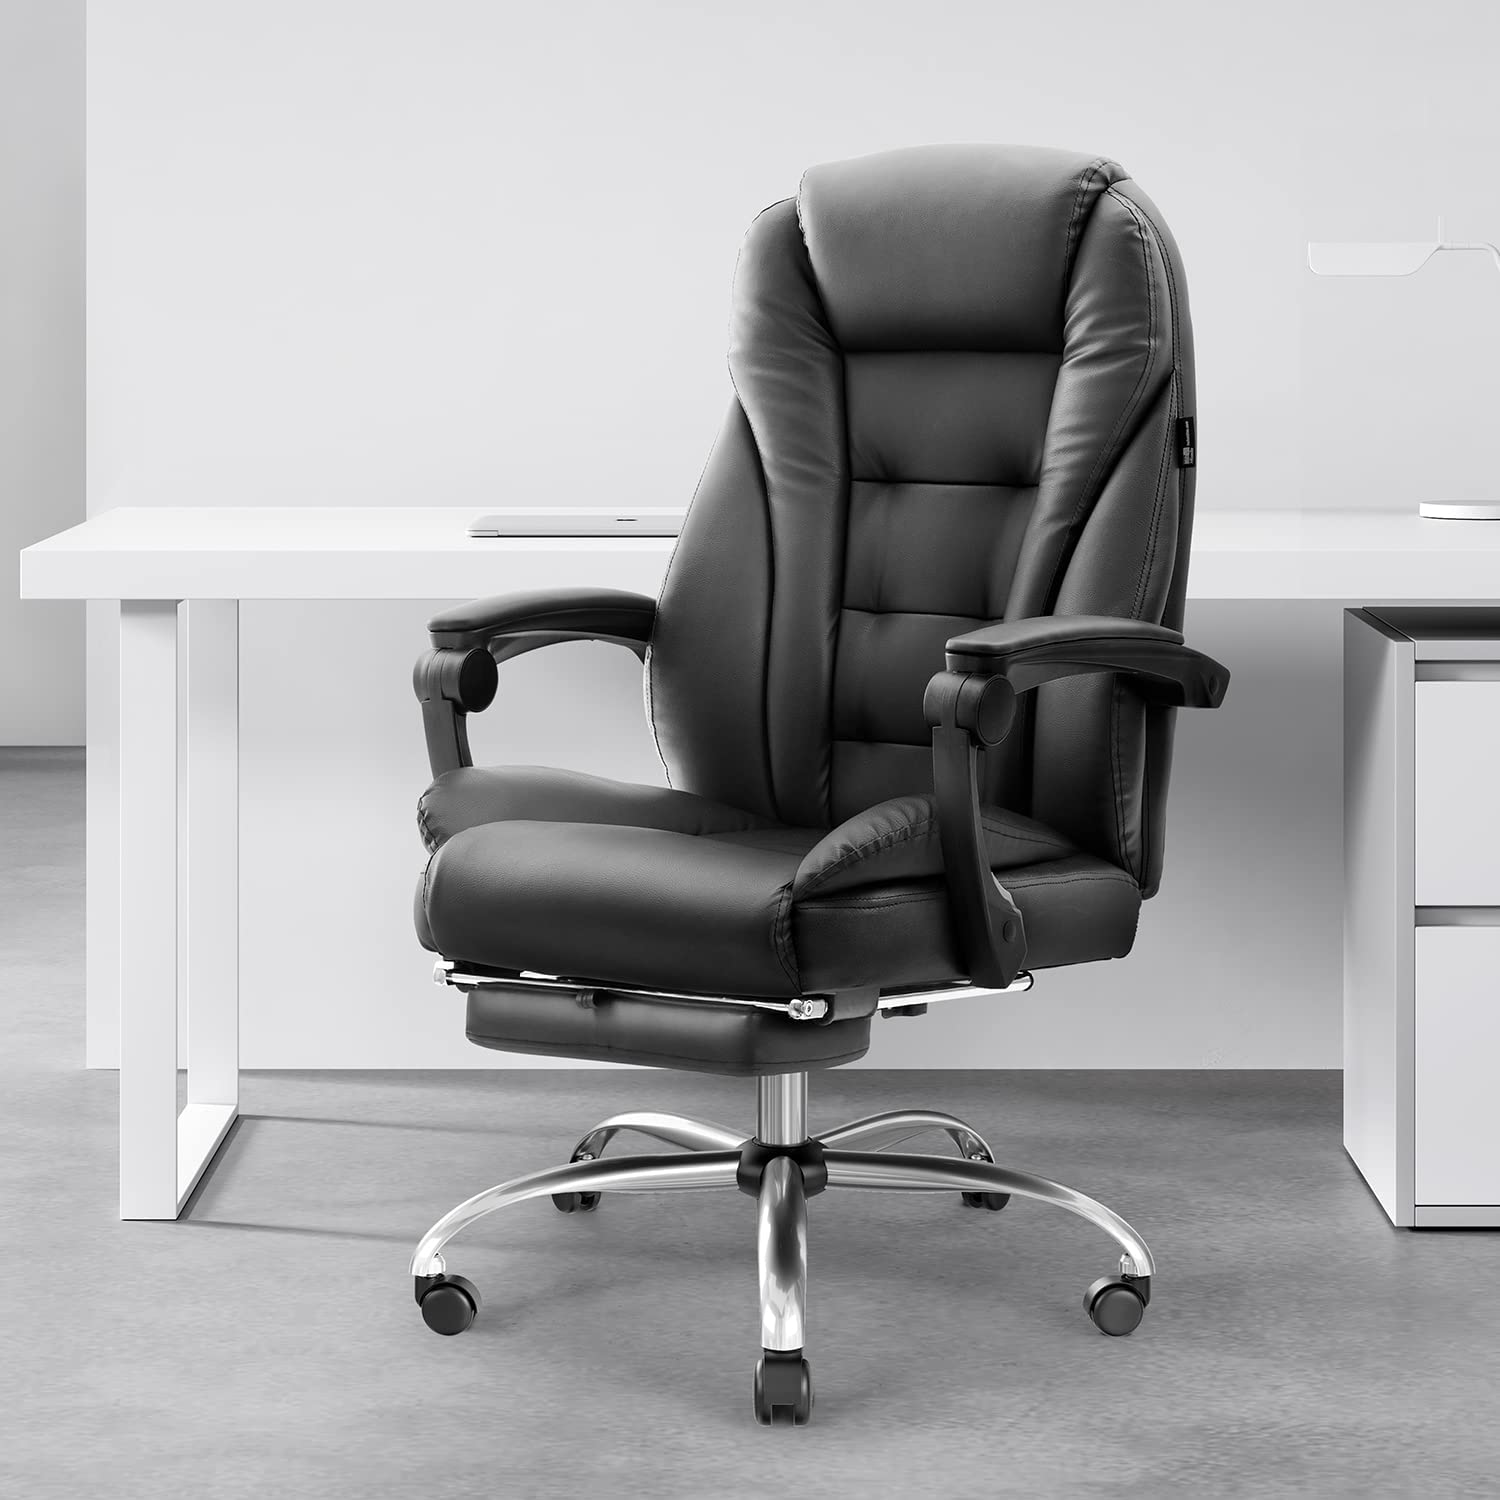 Executive Office Chair: The Highest Level of Comfort & Luxury